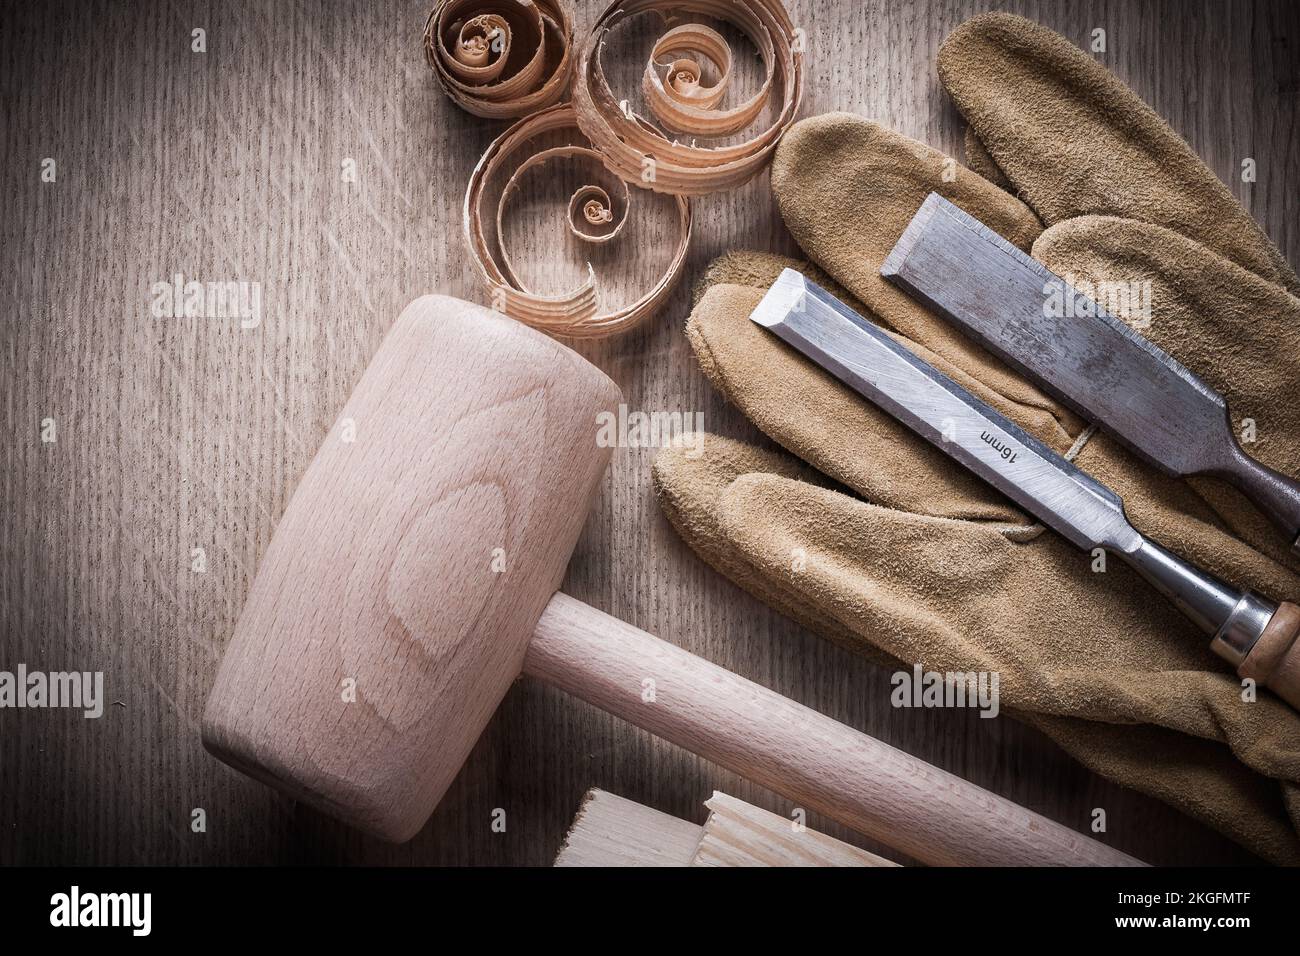 Wooden bricks hammer curled up planning chips firmer chisels leather gloves on wood board construction concept. Stock Photo